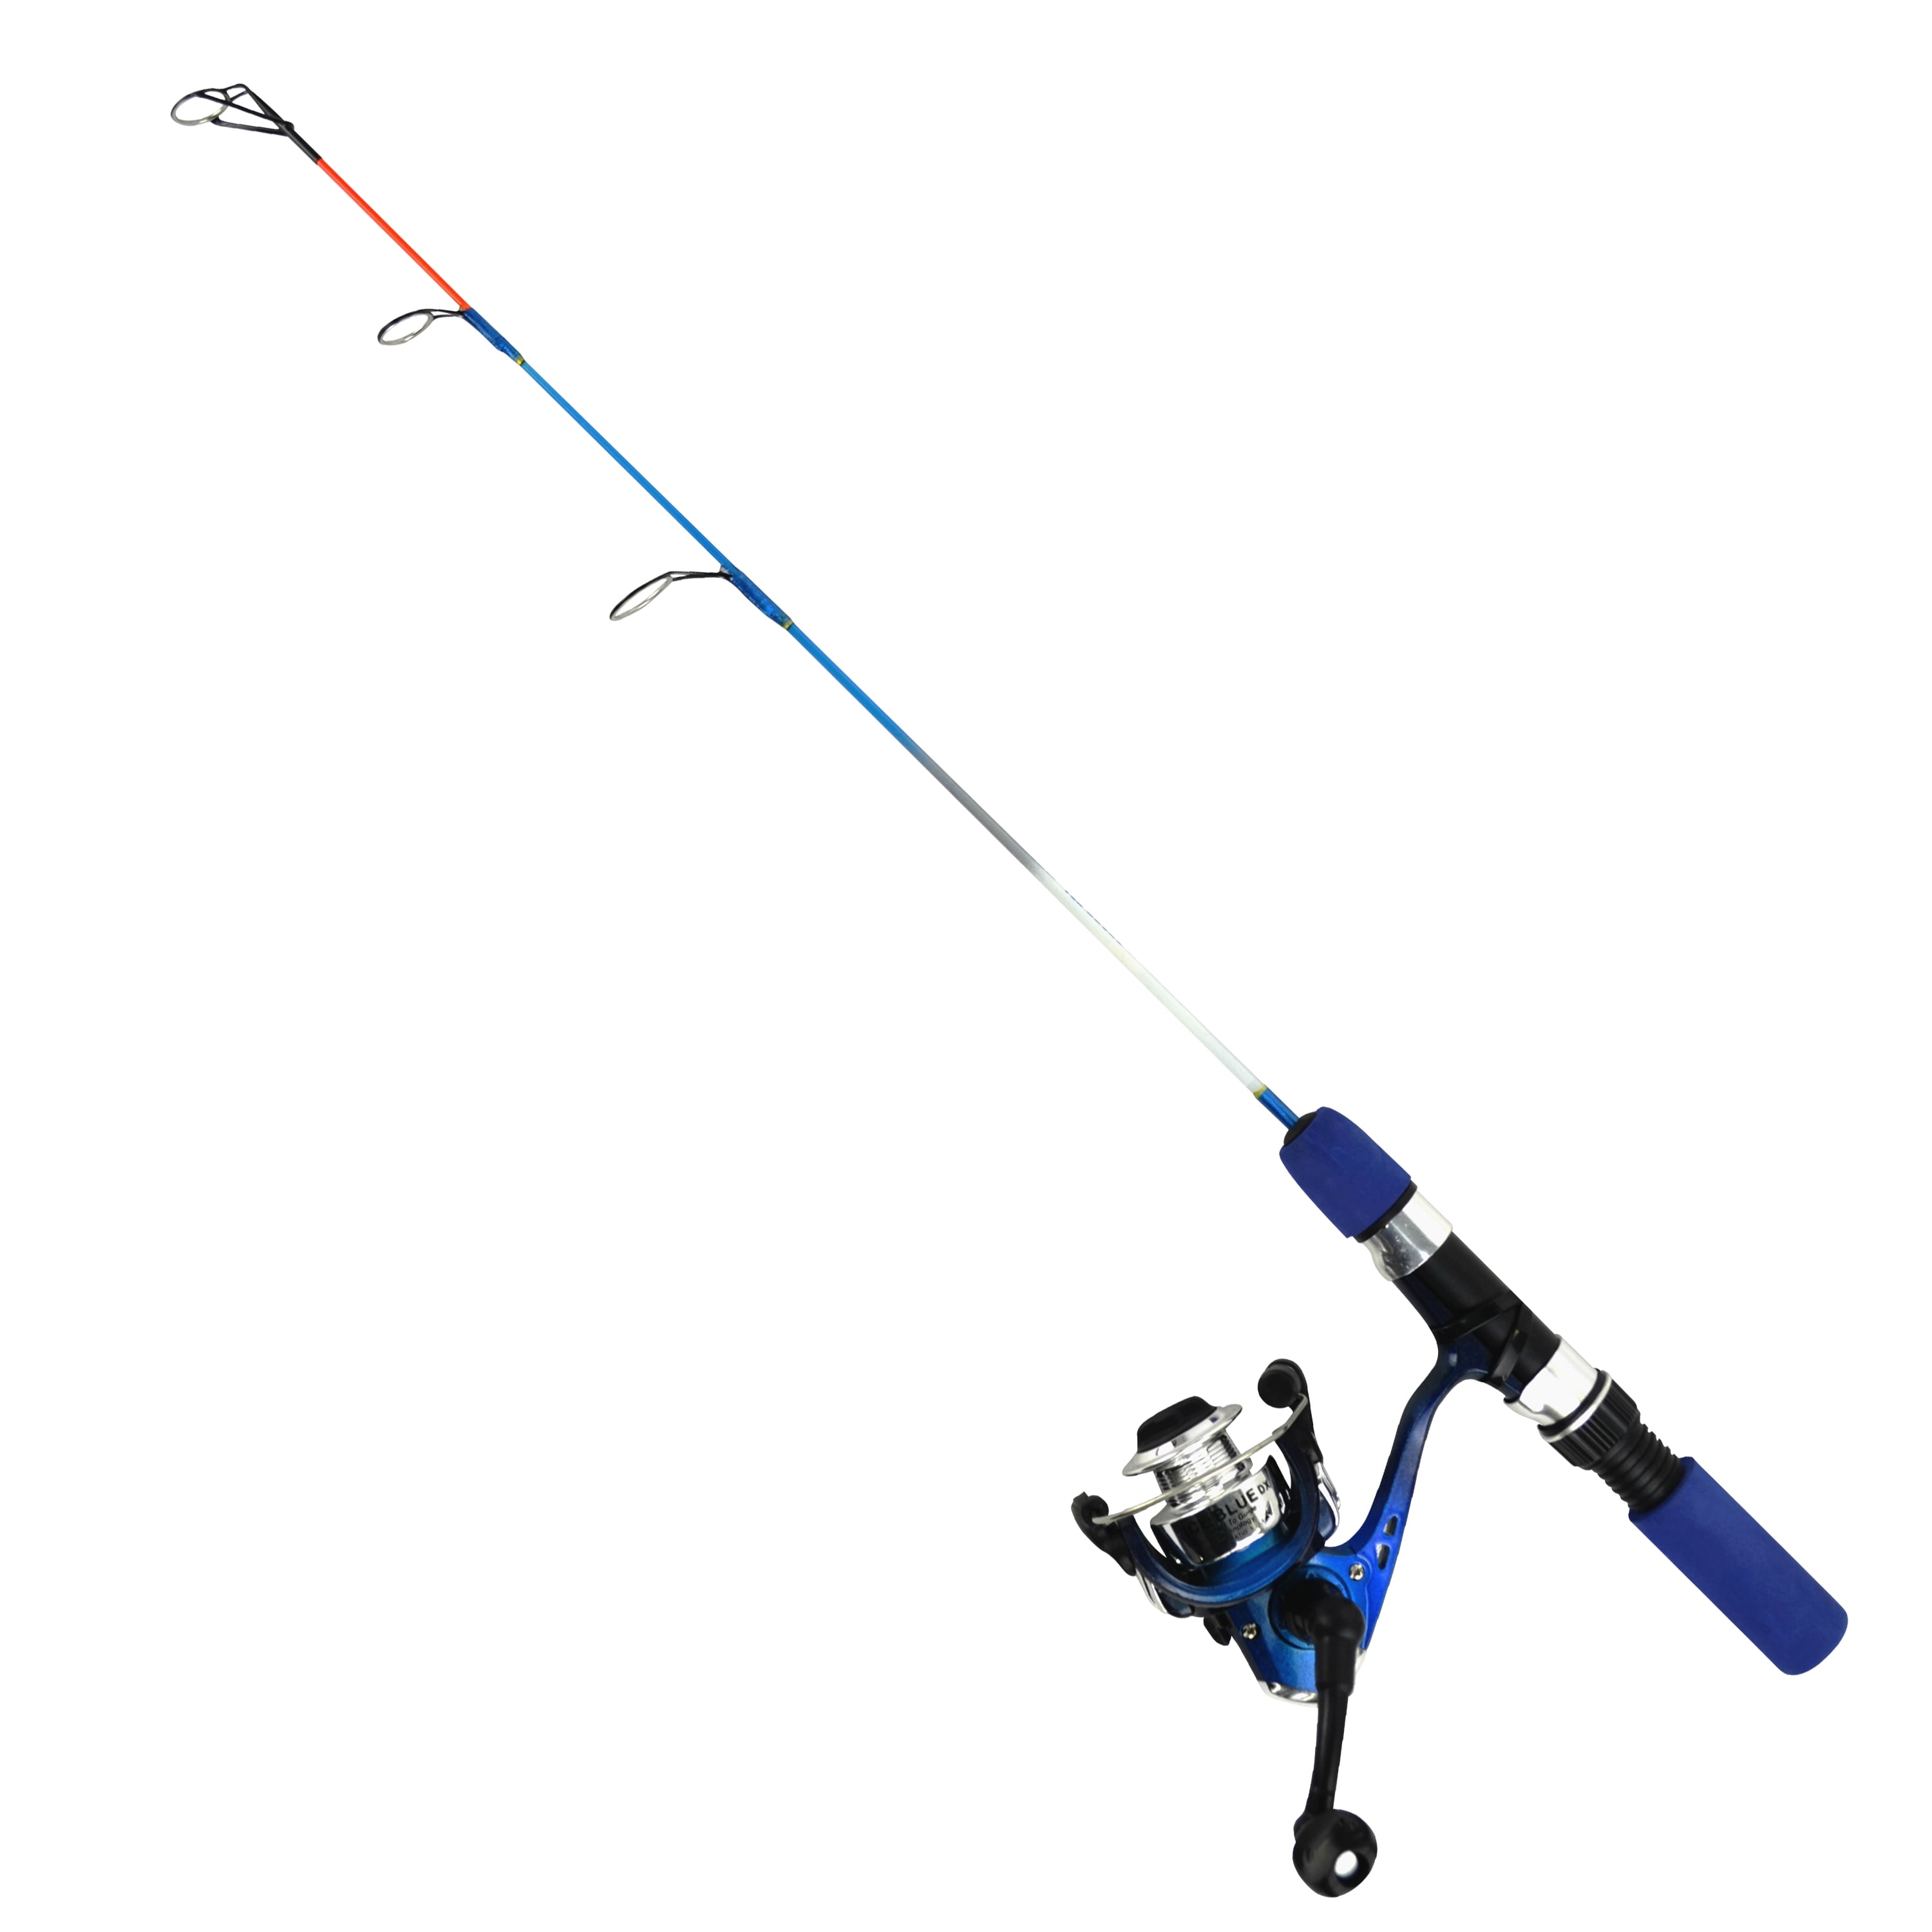 Ice Fishing Rods and Reel Combos Designed by Basstrike